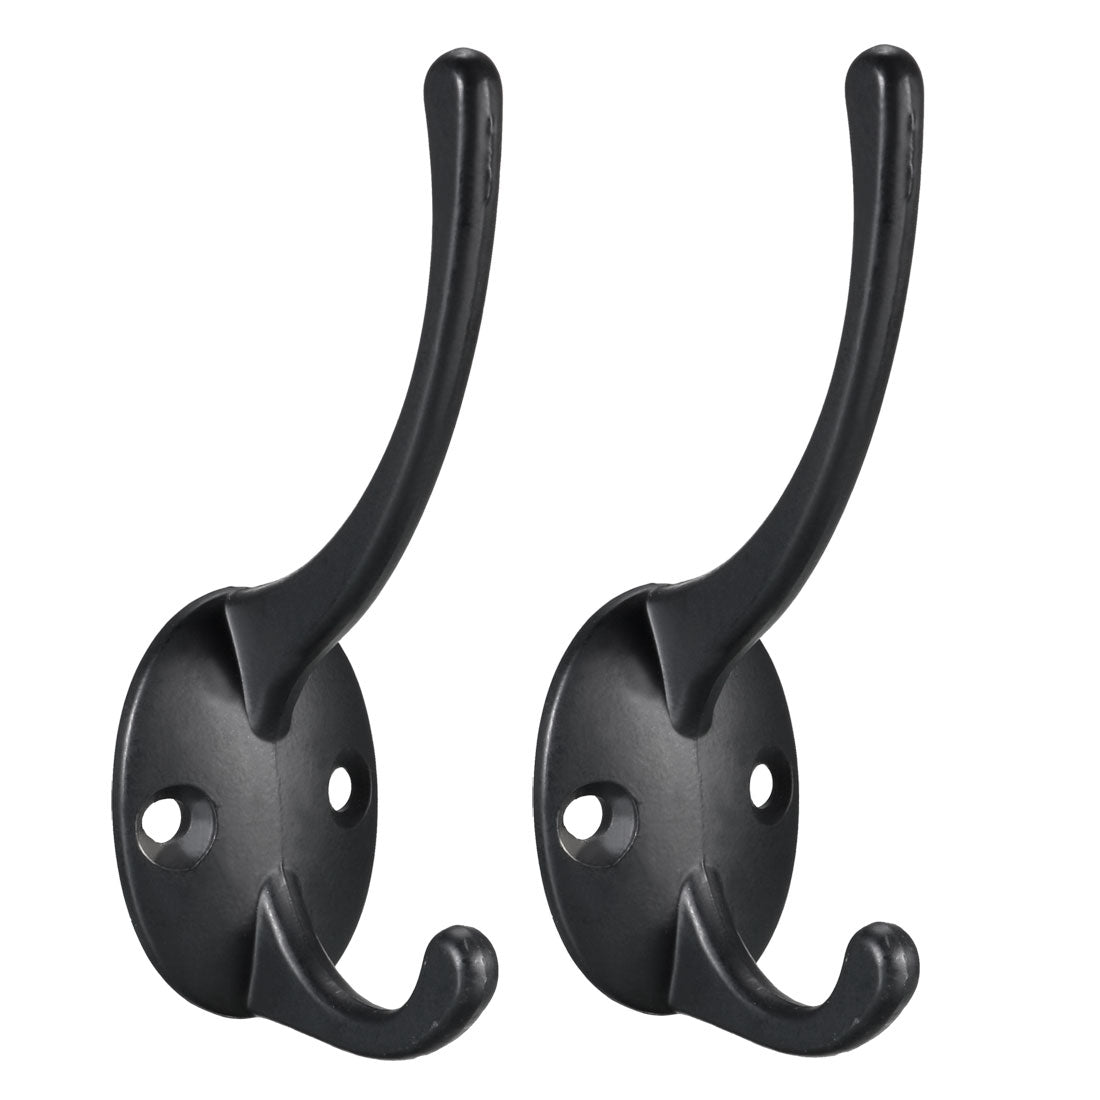 uxcell Uxcell Dual Prong Coat Hooks Wall Mounted Retro Double Hooks Utility Black Hook for Coat Scarf Bag Towel Key Cap Cup Hat 87mm x 29mm x 42mm 2pcs